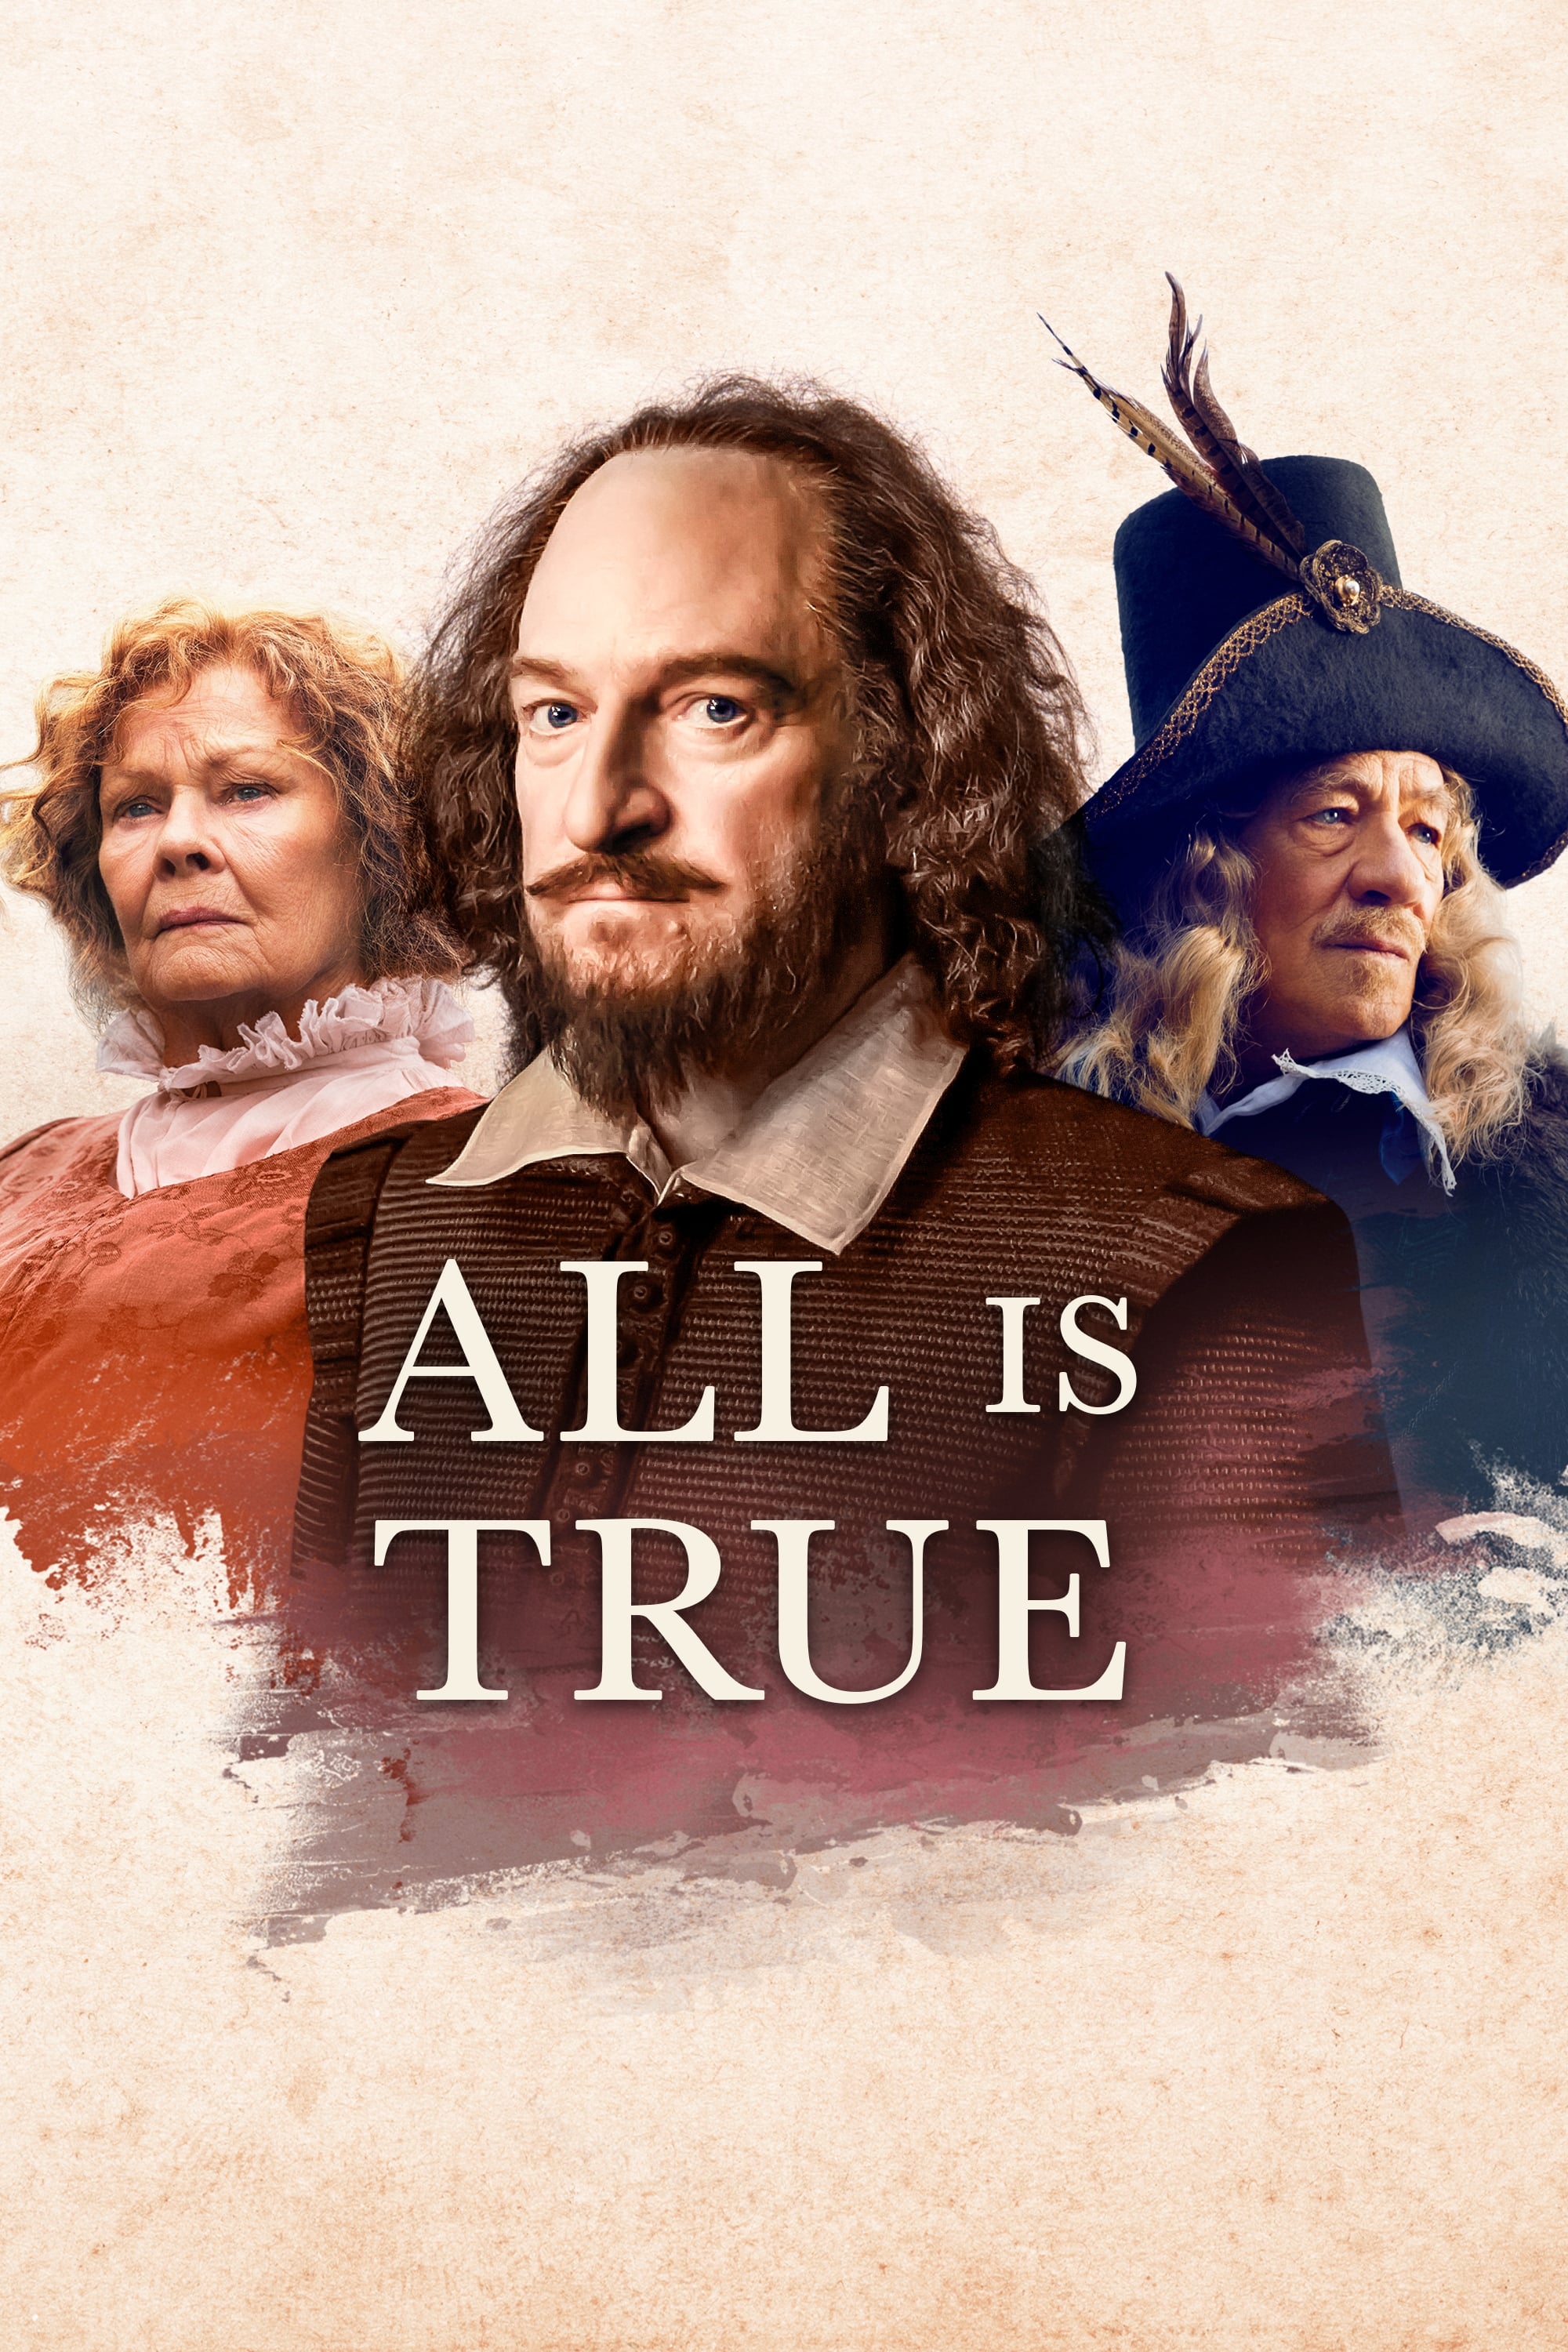 All Is True streaming